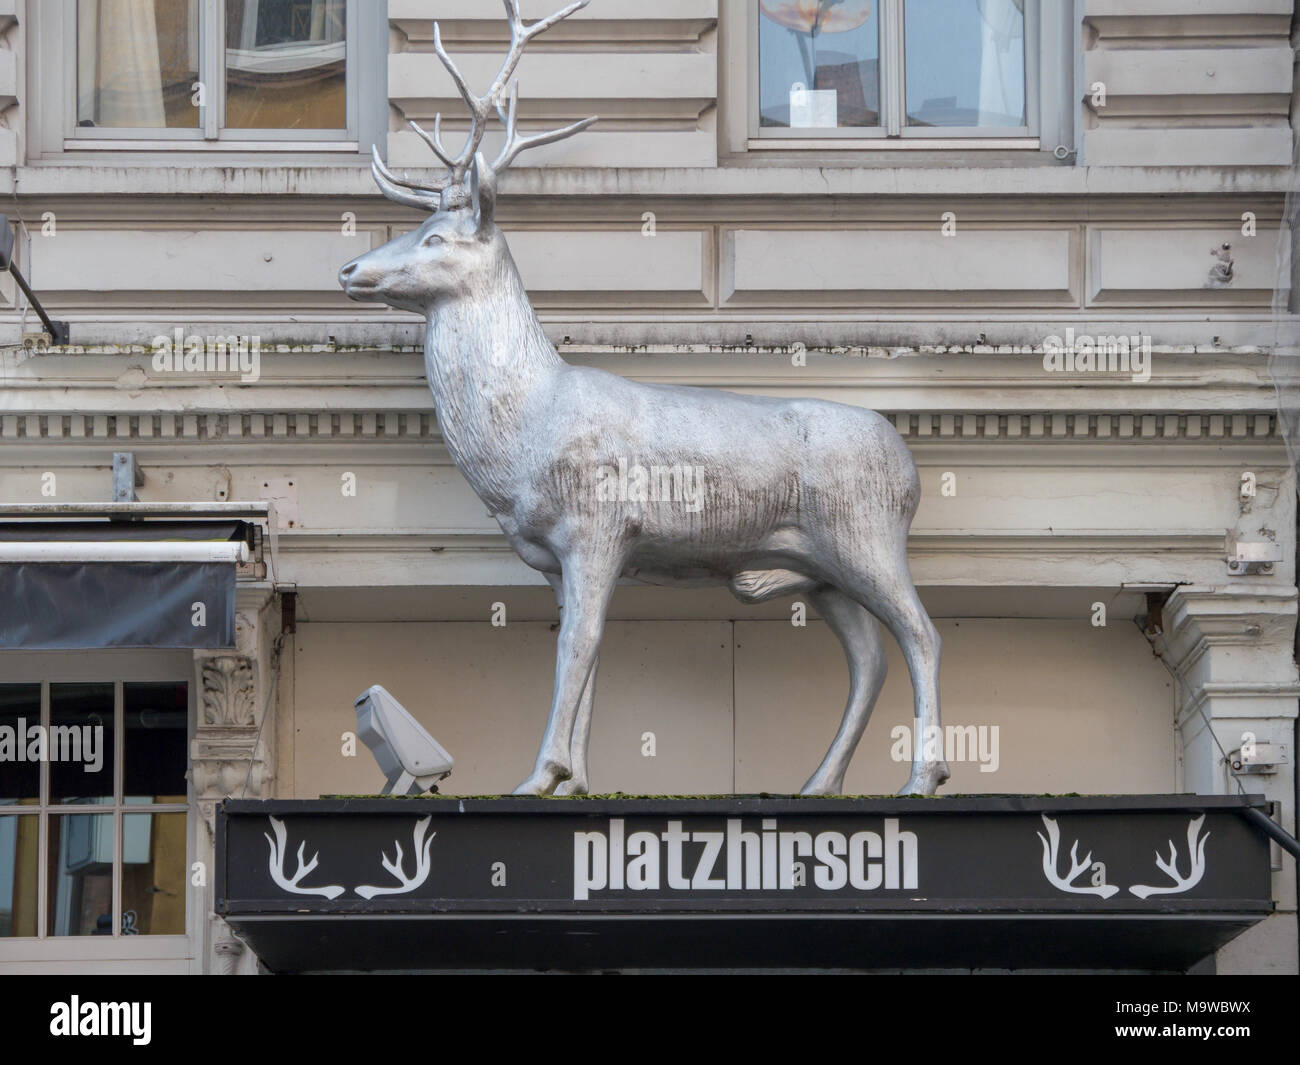 Hamburg, Germany - April 03, 2016: Statue of a male deer, stag, at roof of entrance to club platzhirsch in Hamburg, St. Pauli. Stock Photo